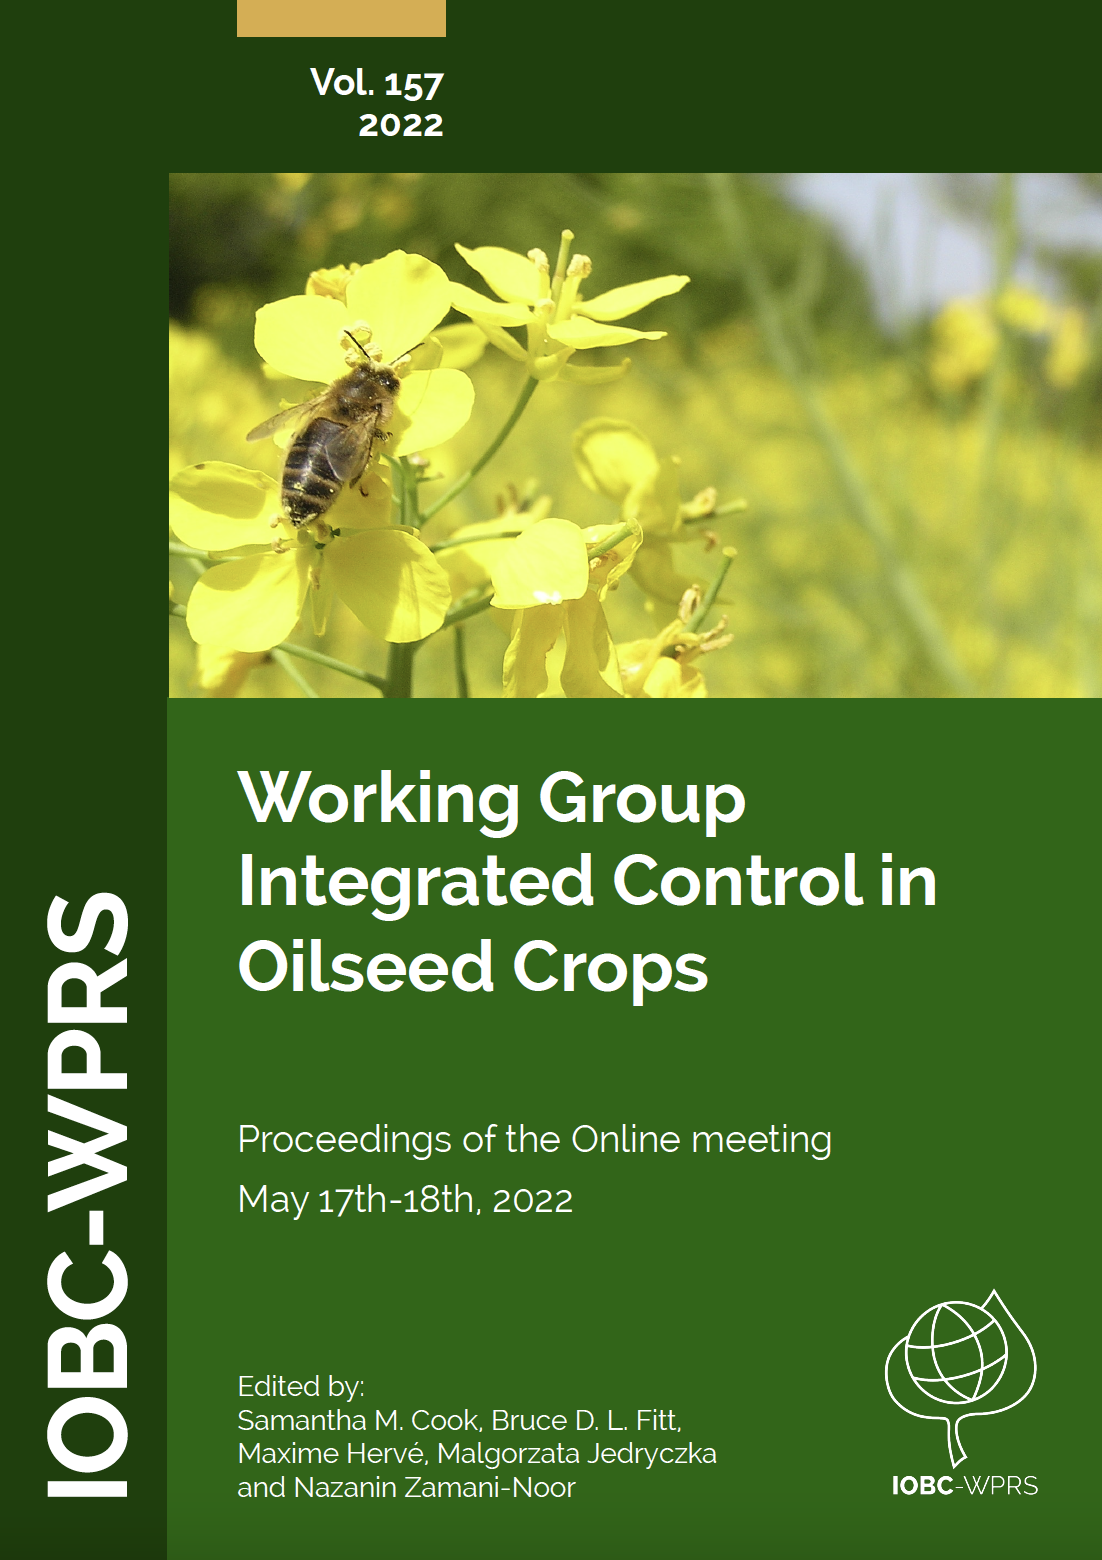 New Bulletin: Integrated Control in Oilseed Crops